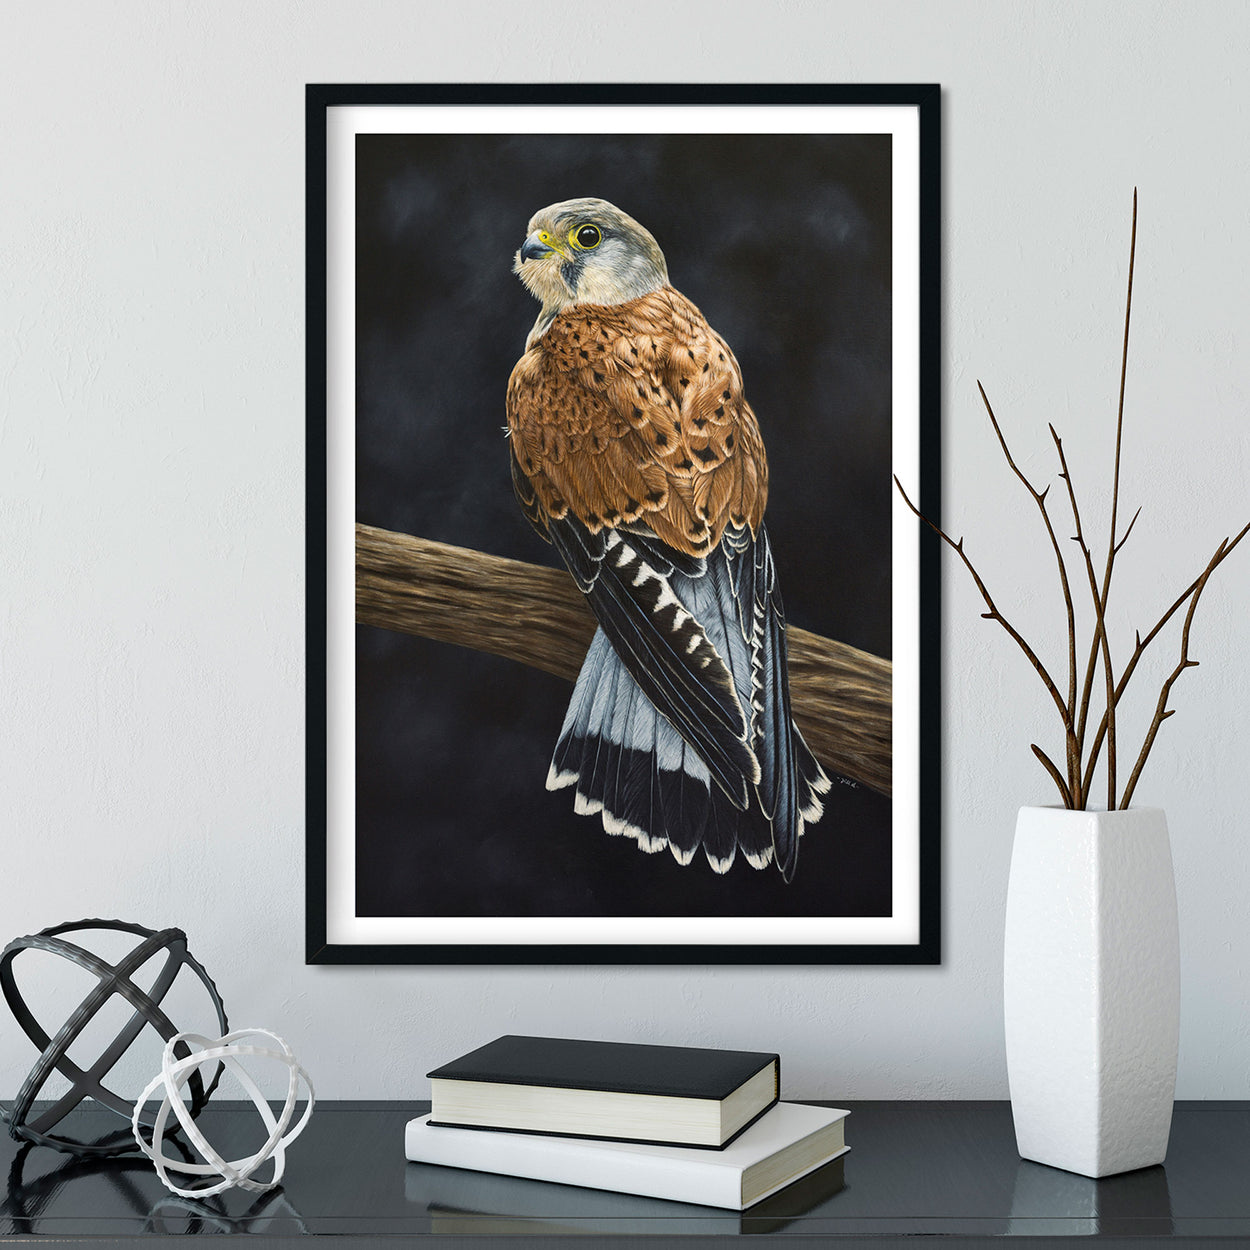 Black frame on white wall containing a print featuring a male common kestrel painting